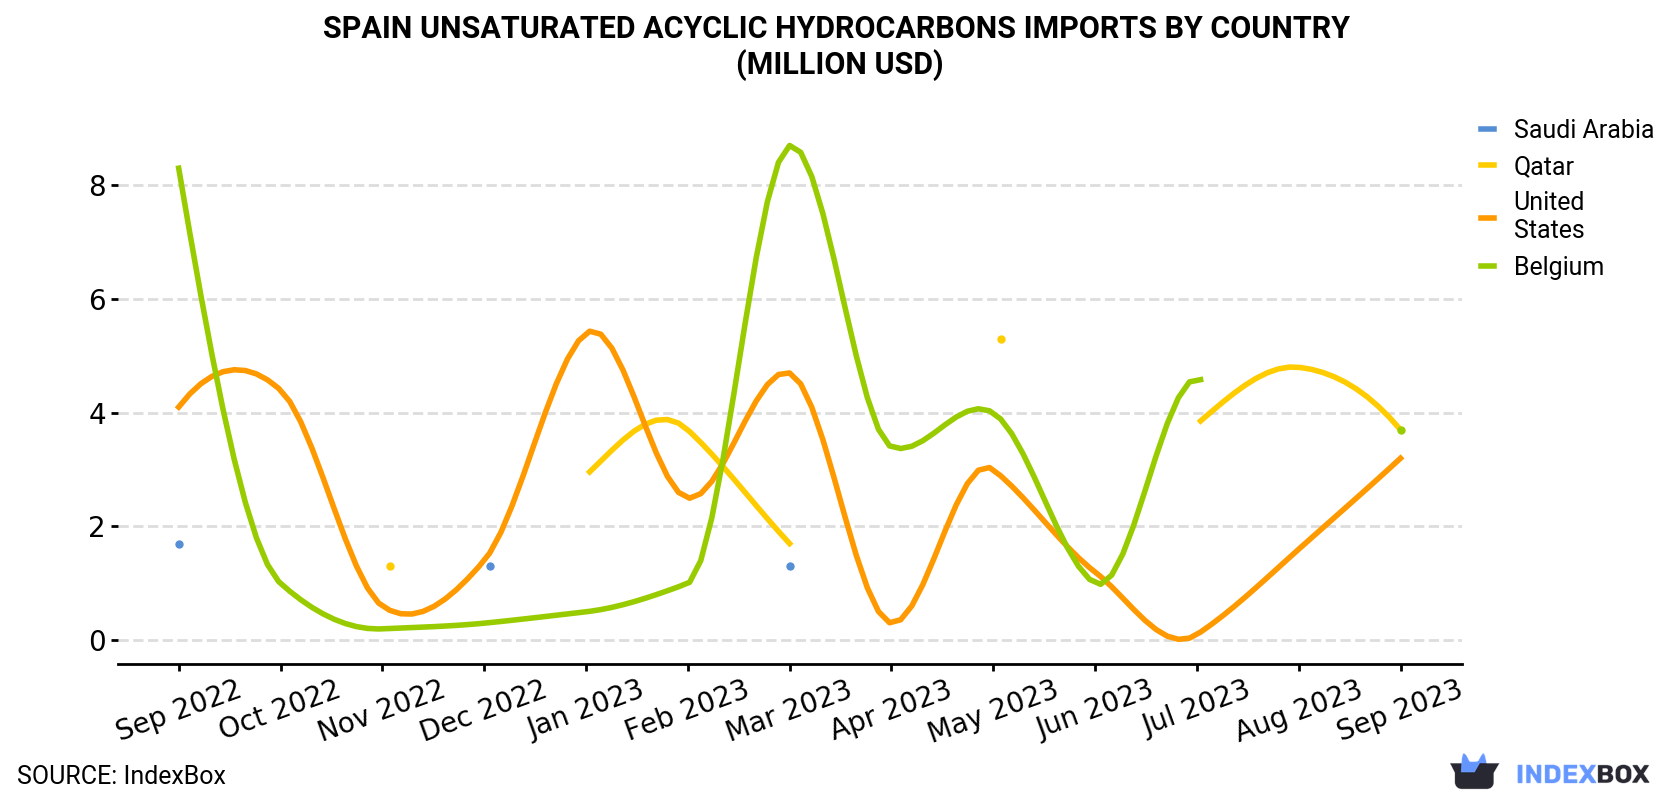 Spain Unsaturated Acyclic Hydrocarbons Imports By Country (Million USD)